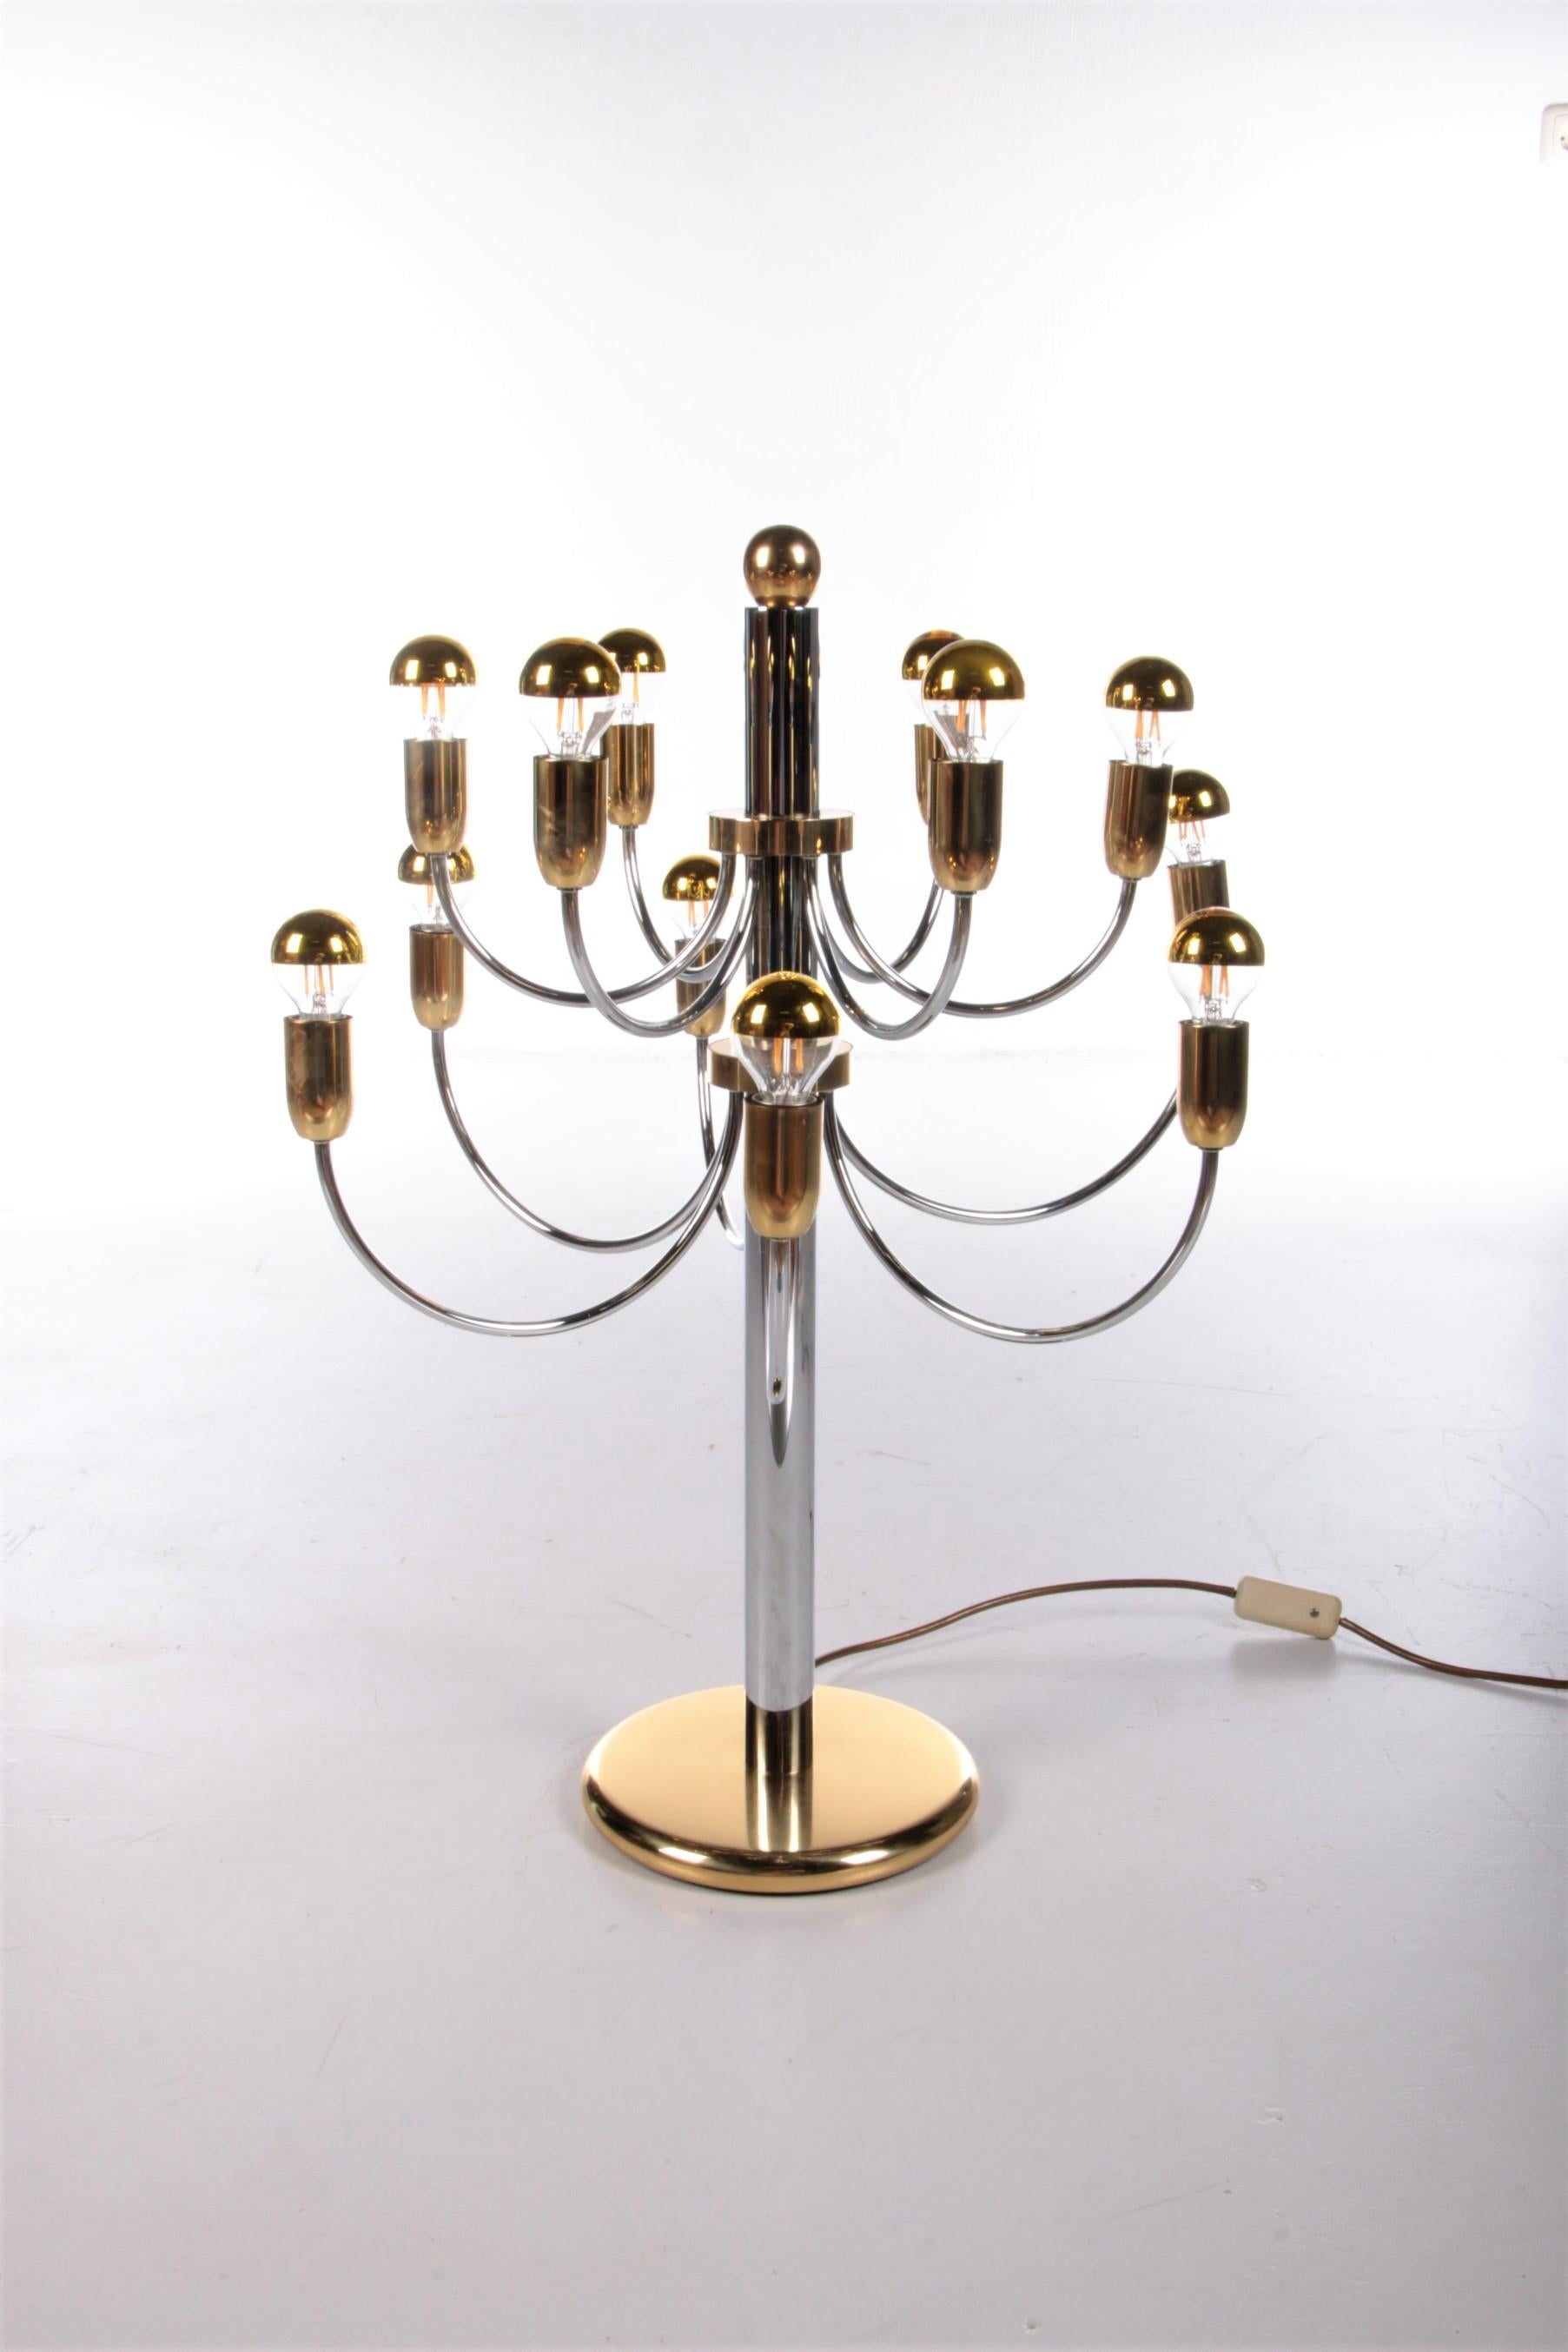 Vintage Italian Table Lamp Hollywood Regency, 1960


Very nice design lamp seems to be a design by Gaetano Sciolari.

This nature-inspired lamp is a rare example and follows the lines of the Pistillino lamp, designed in 1969 by Studio Tetrarch for